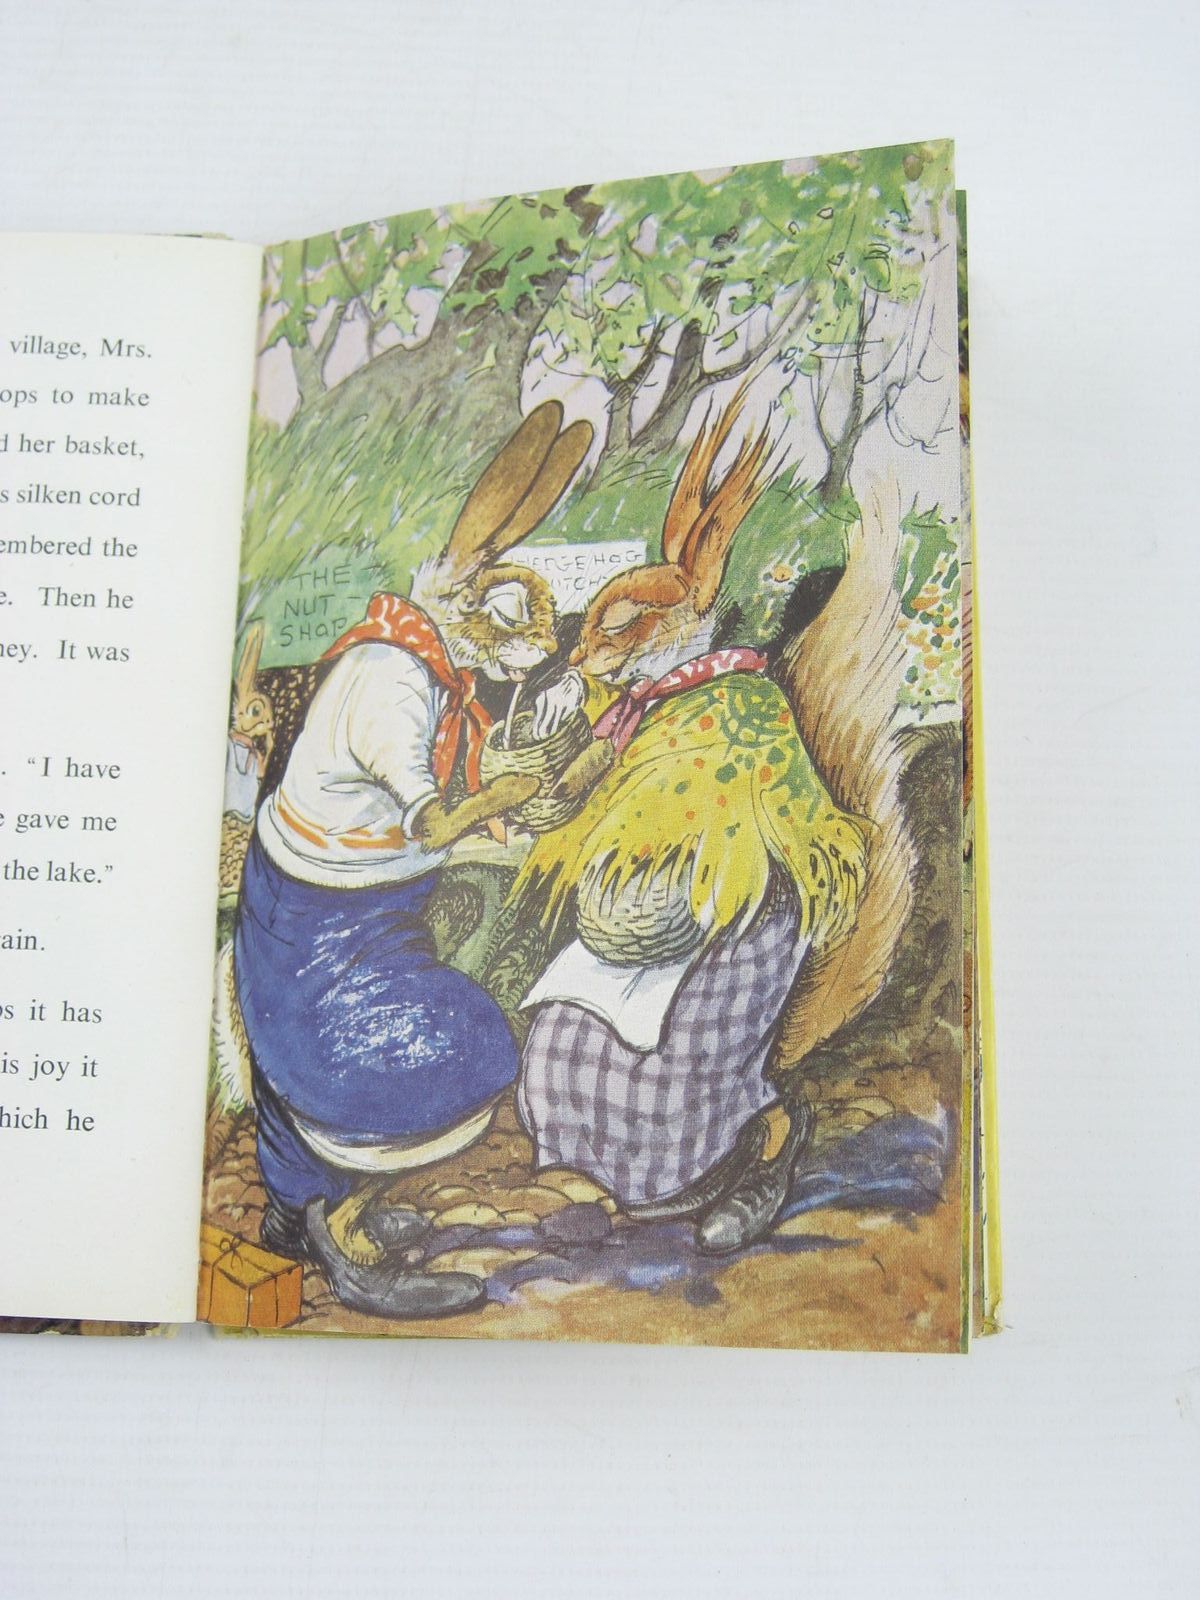 Photo of A LITTLE SILK APRON written by Richards, Dorothy illustrated by Aris, Ernest A. published by Wills & Hepworth Ltd. (STOCK CODE: 739689)  for sale by Stella & Rose's Books